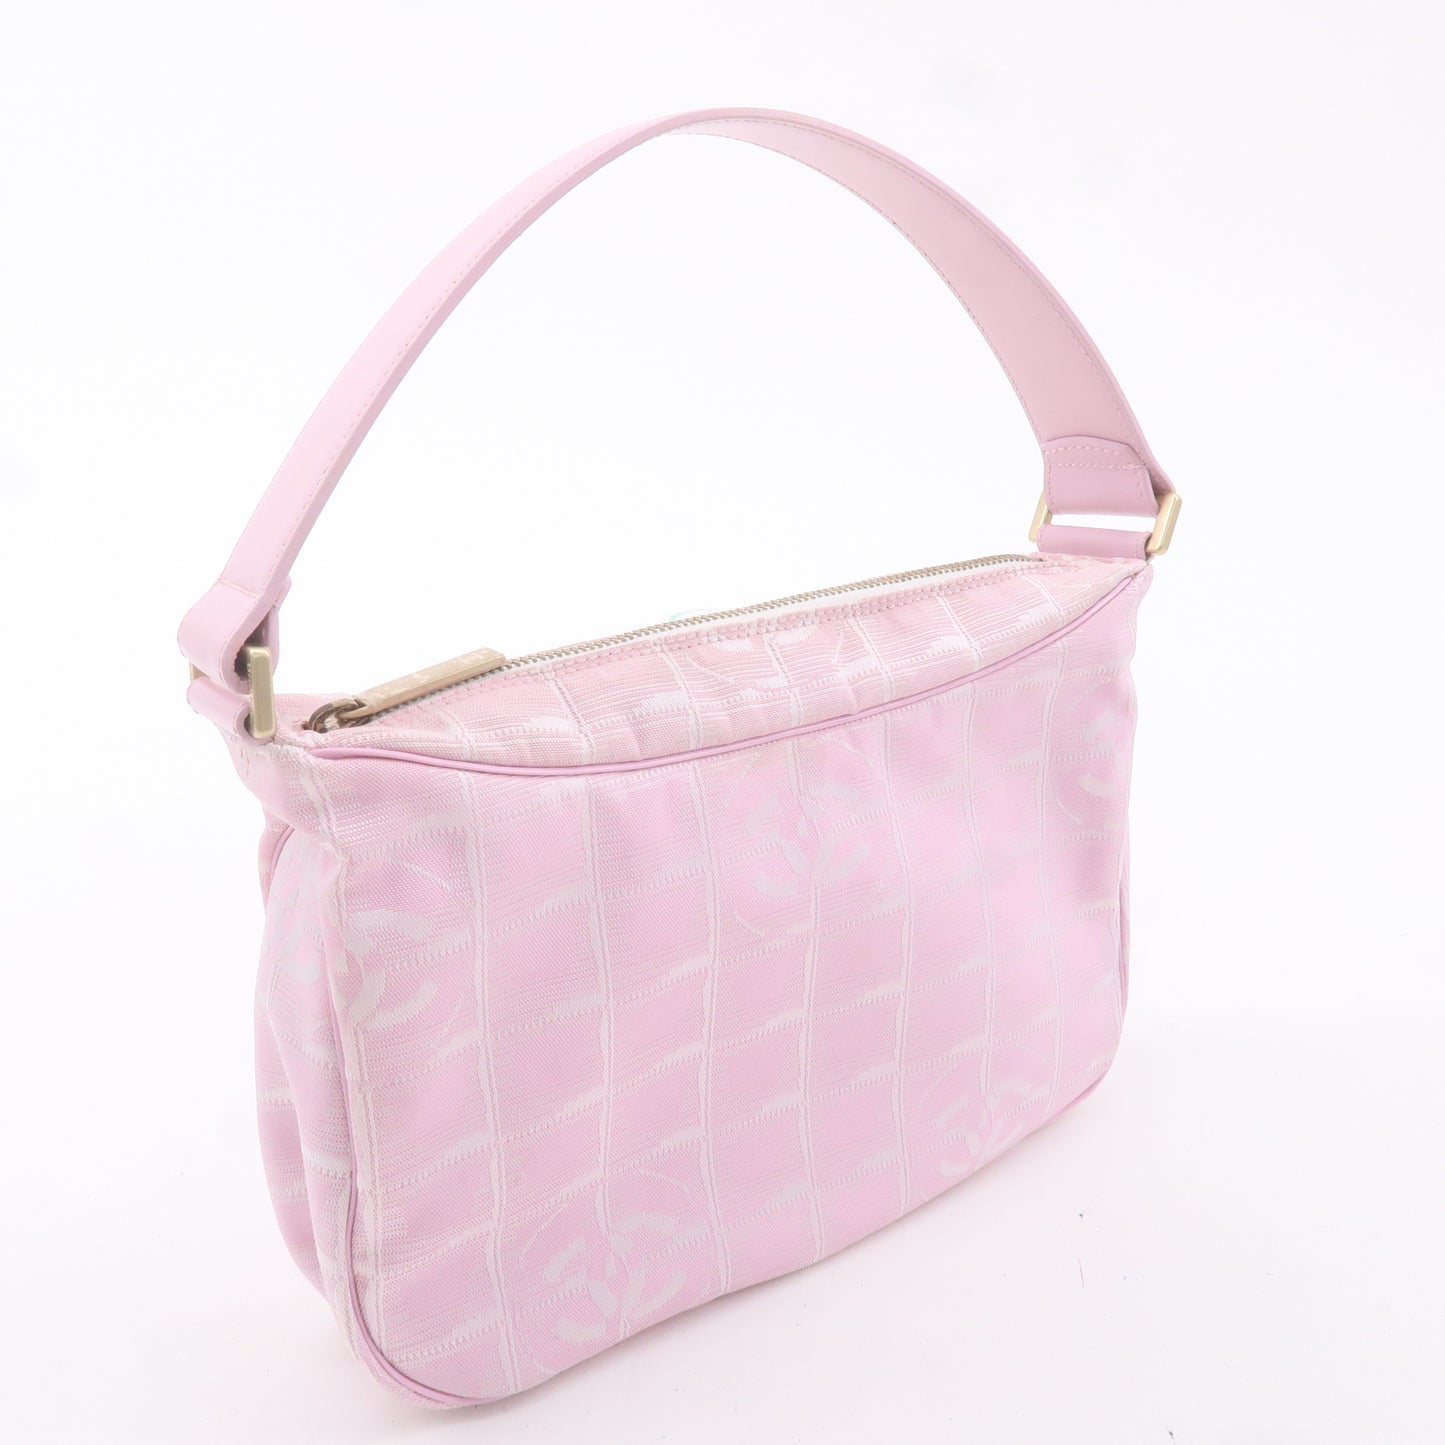 CHANEL New Travel Line Nylon Jacquard Leather Hand Bag Pink A20516